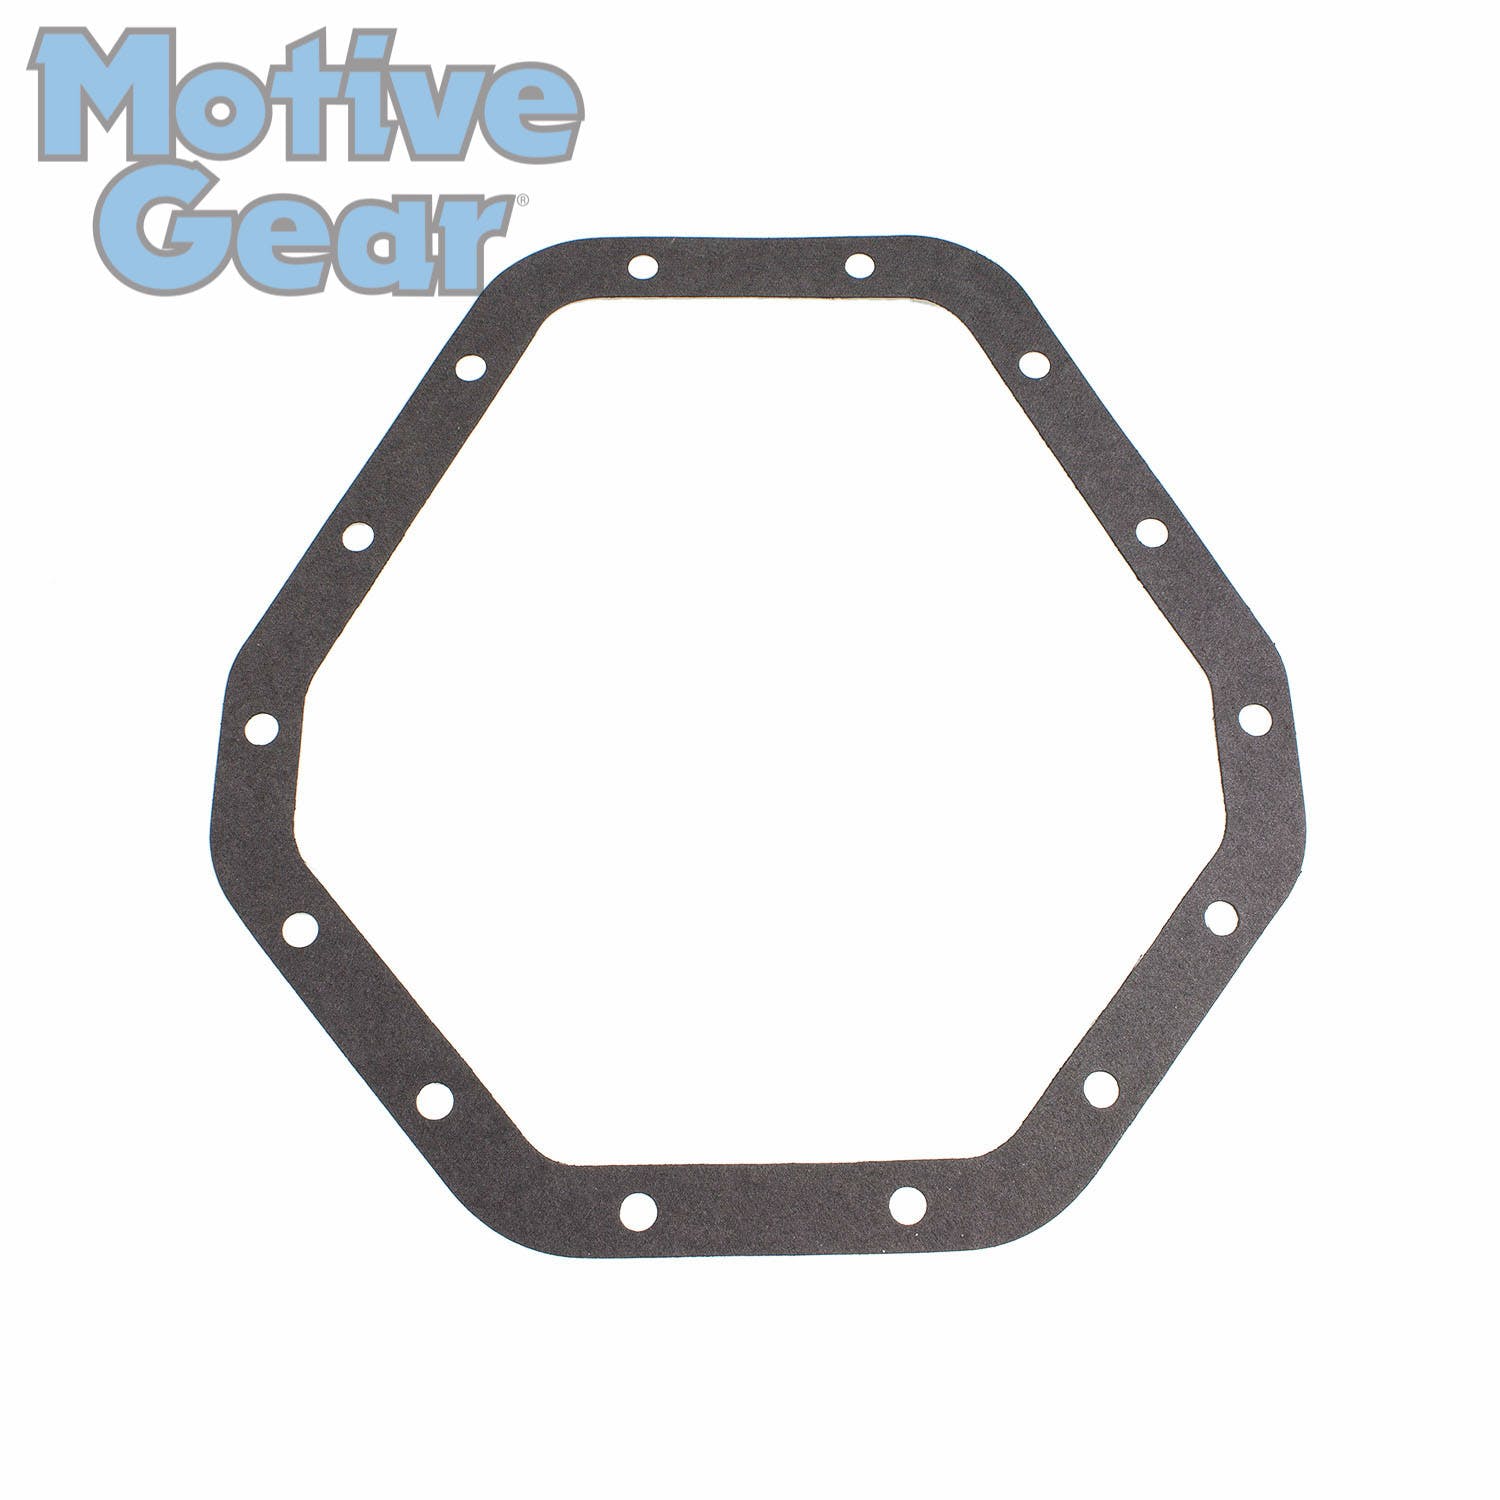 Motive Gear 3977387 Differential Cover Gasket